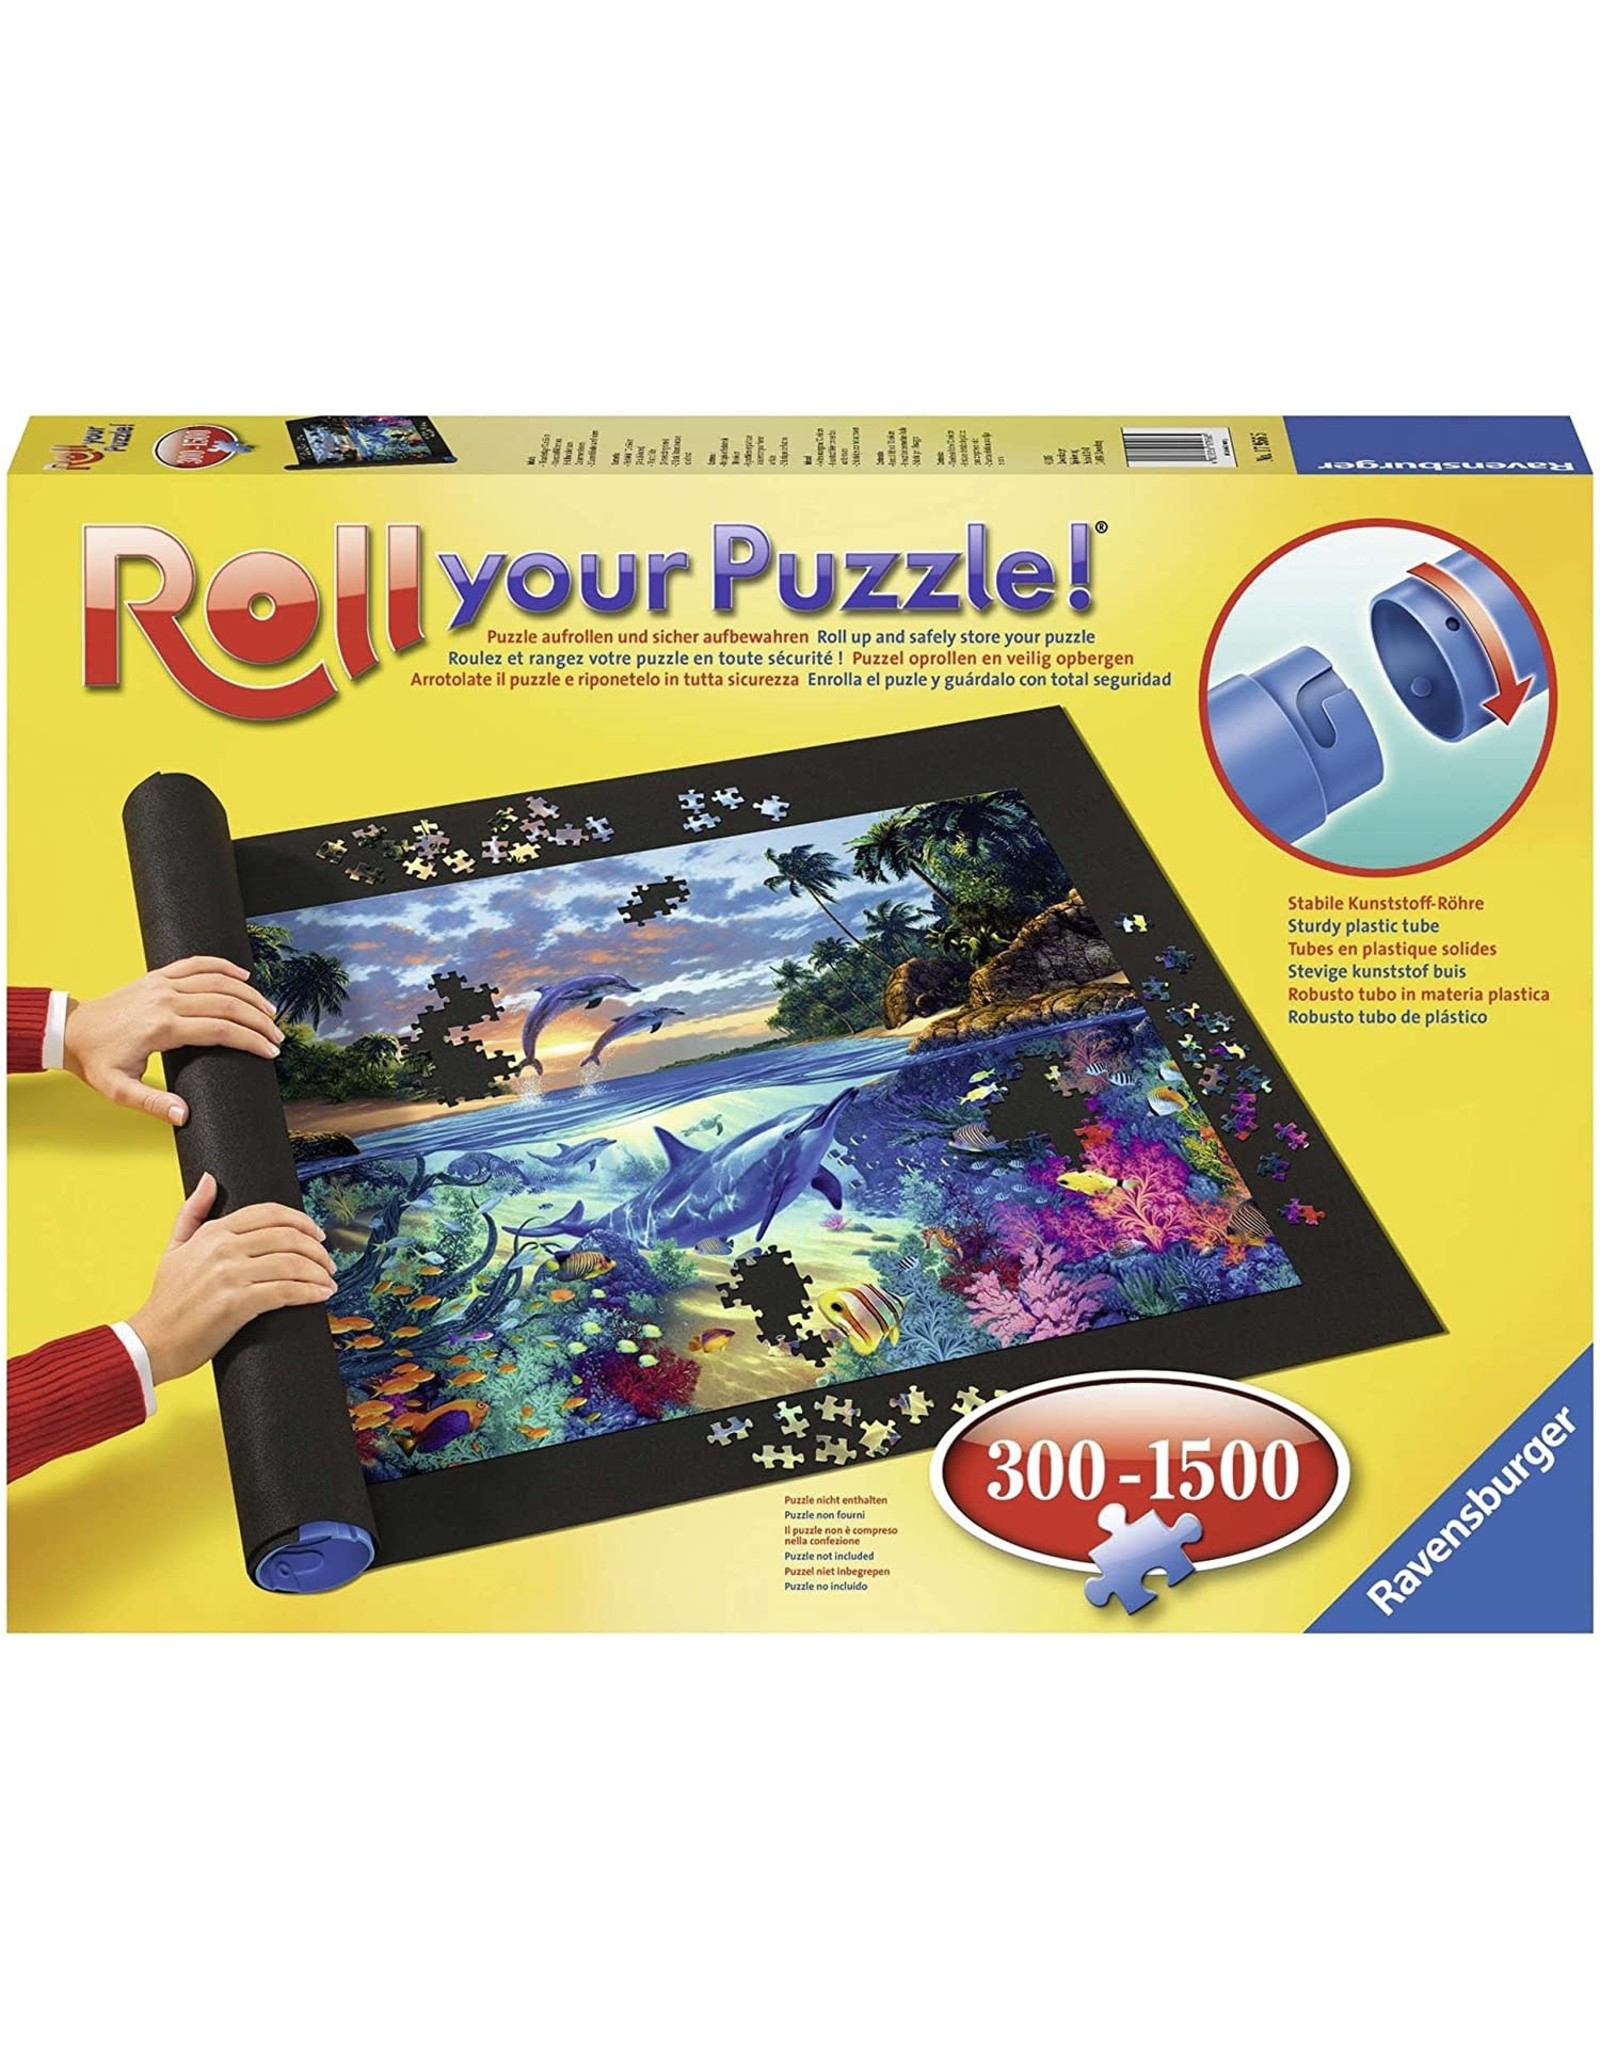 Ravensburger Roll Your Puzzle 300-1500 pc